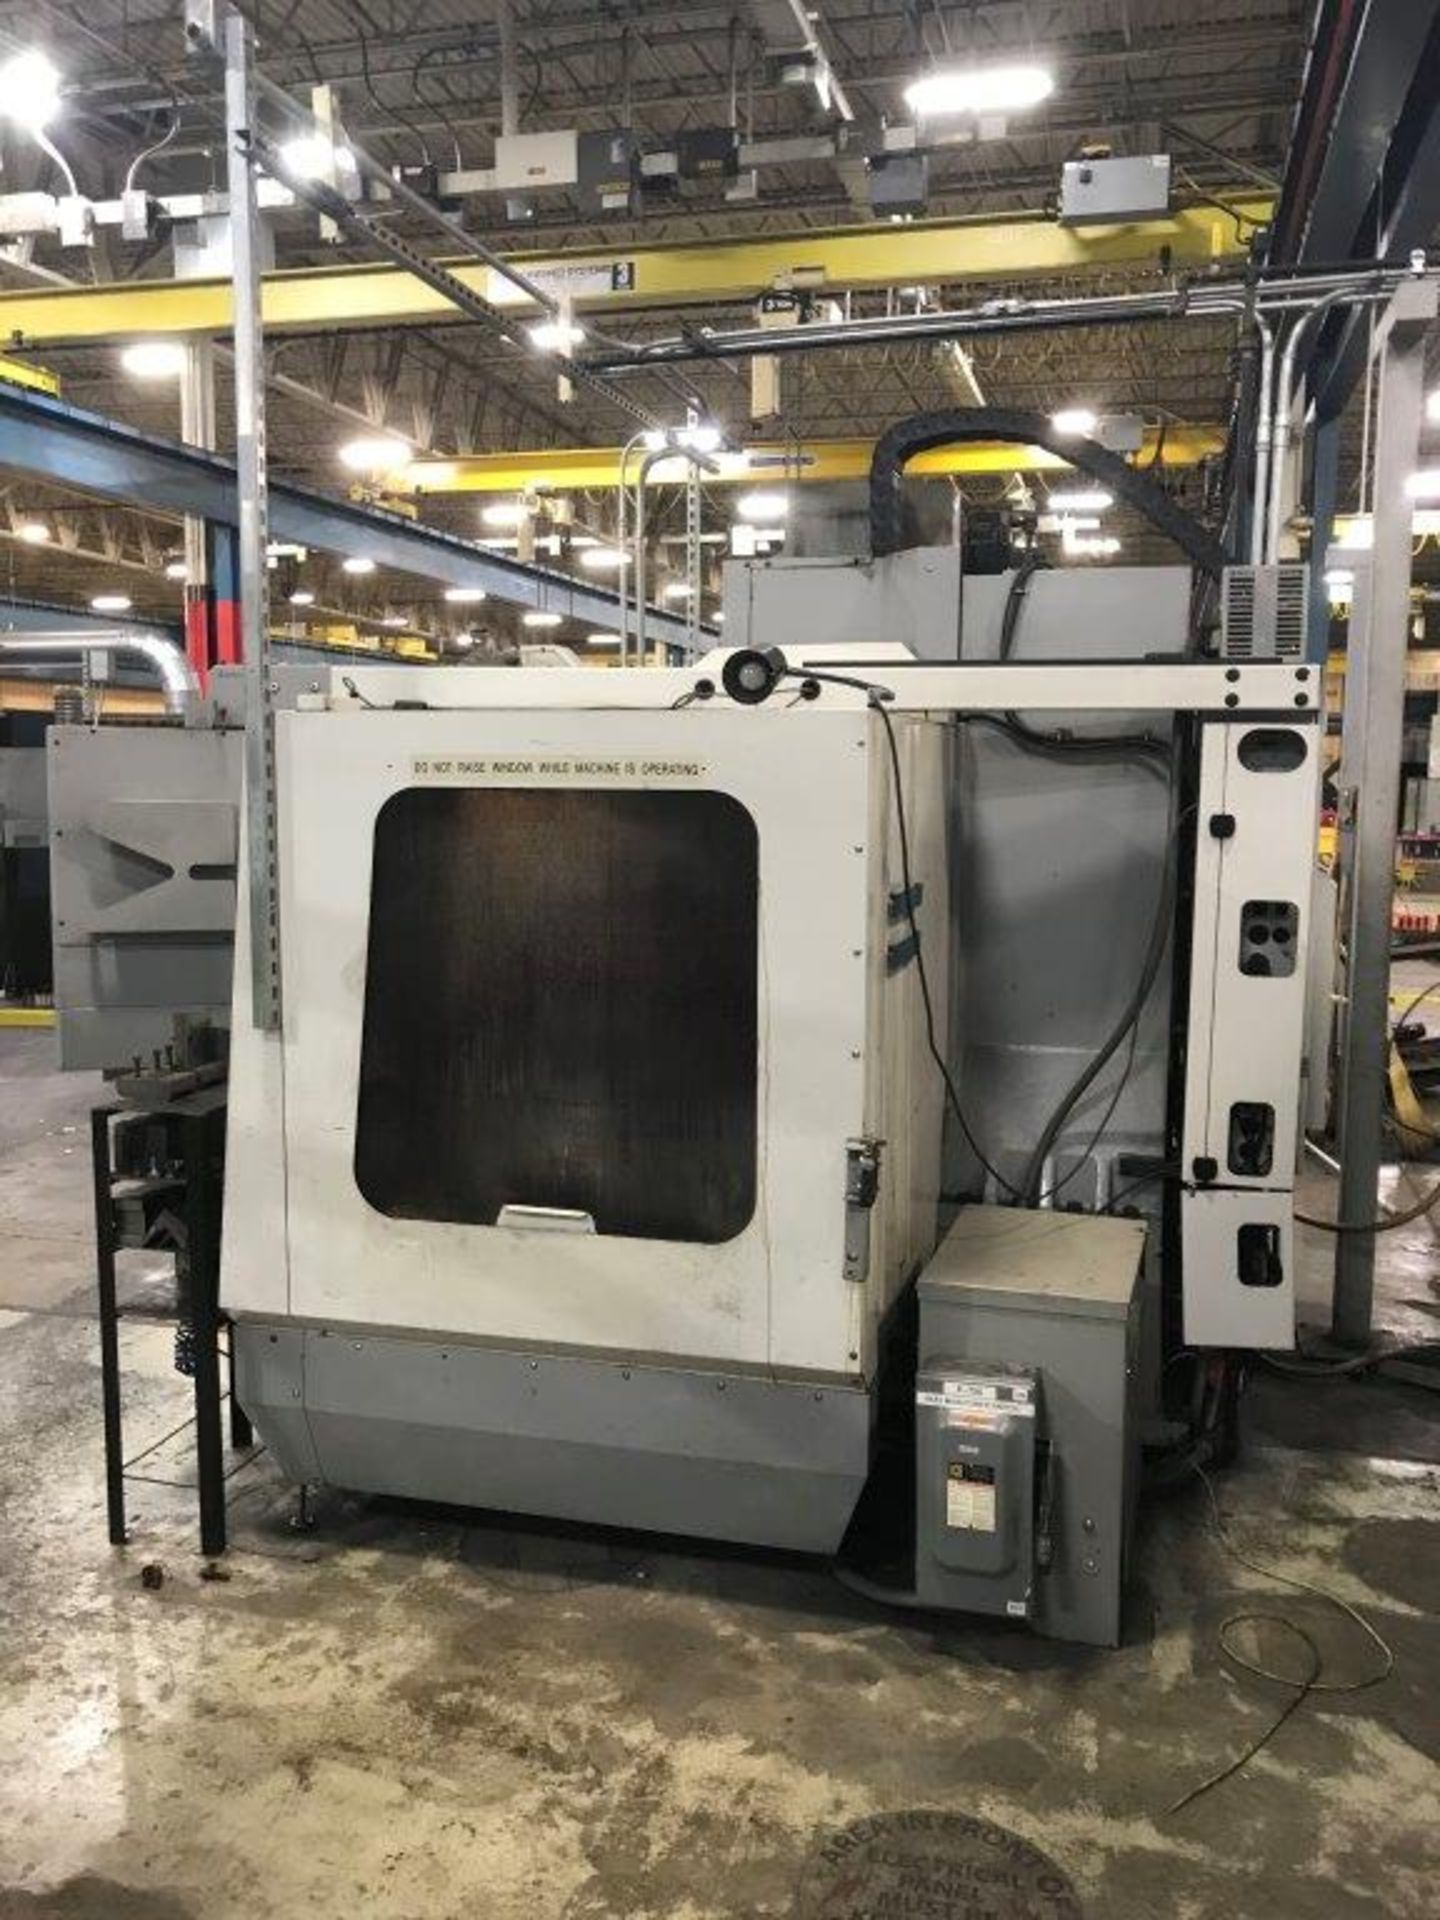 Haas Model VF-4B 3-Axis CNC Vertical Machining Center, 2005 - Image 6 of 7